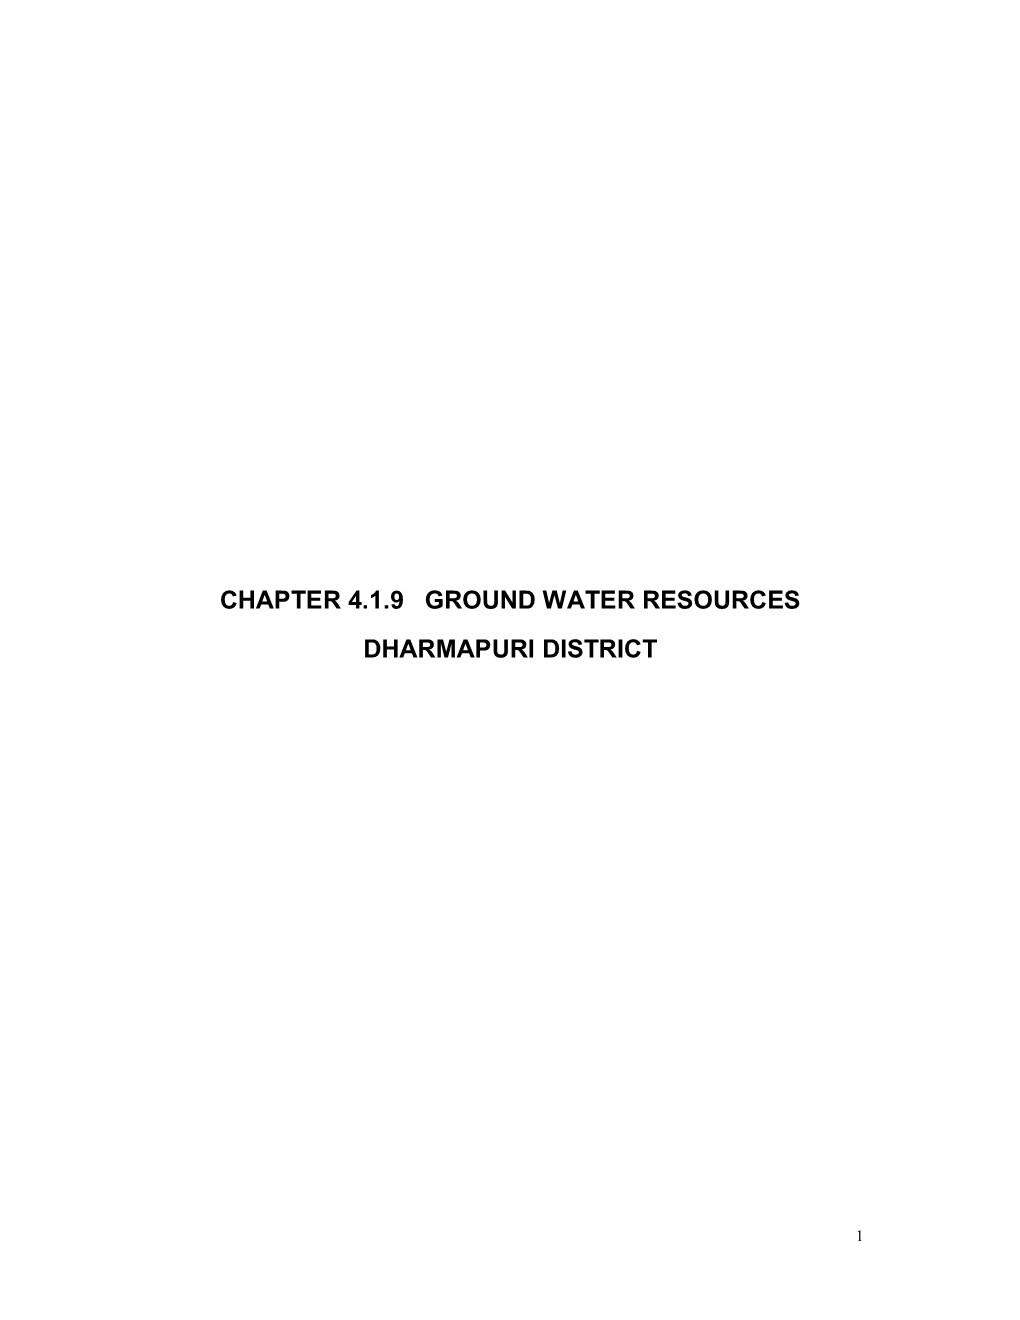 Chapter 4.1.9 Ground Water Resources Dharmapuri District